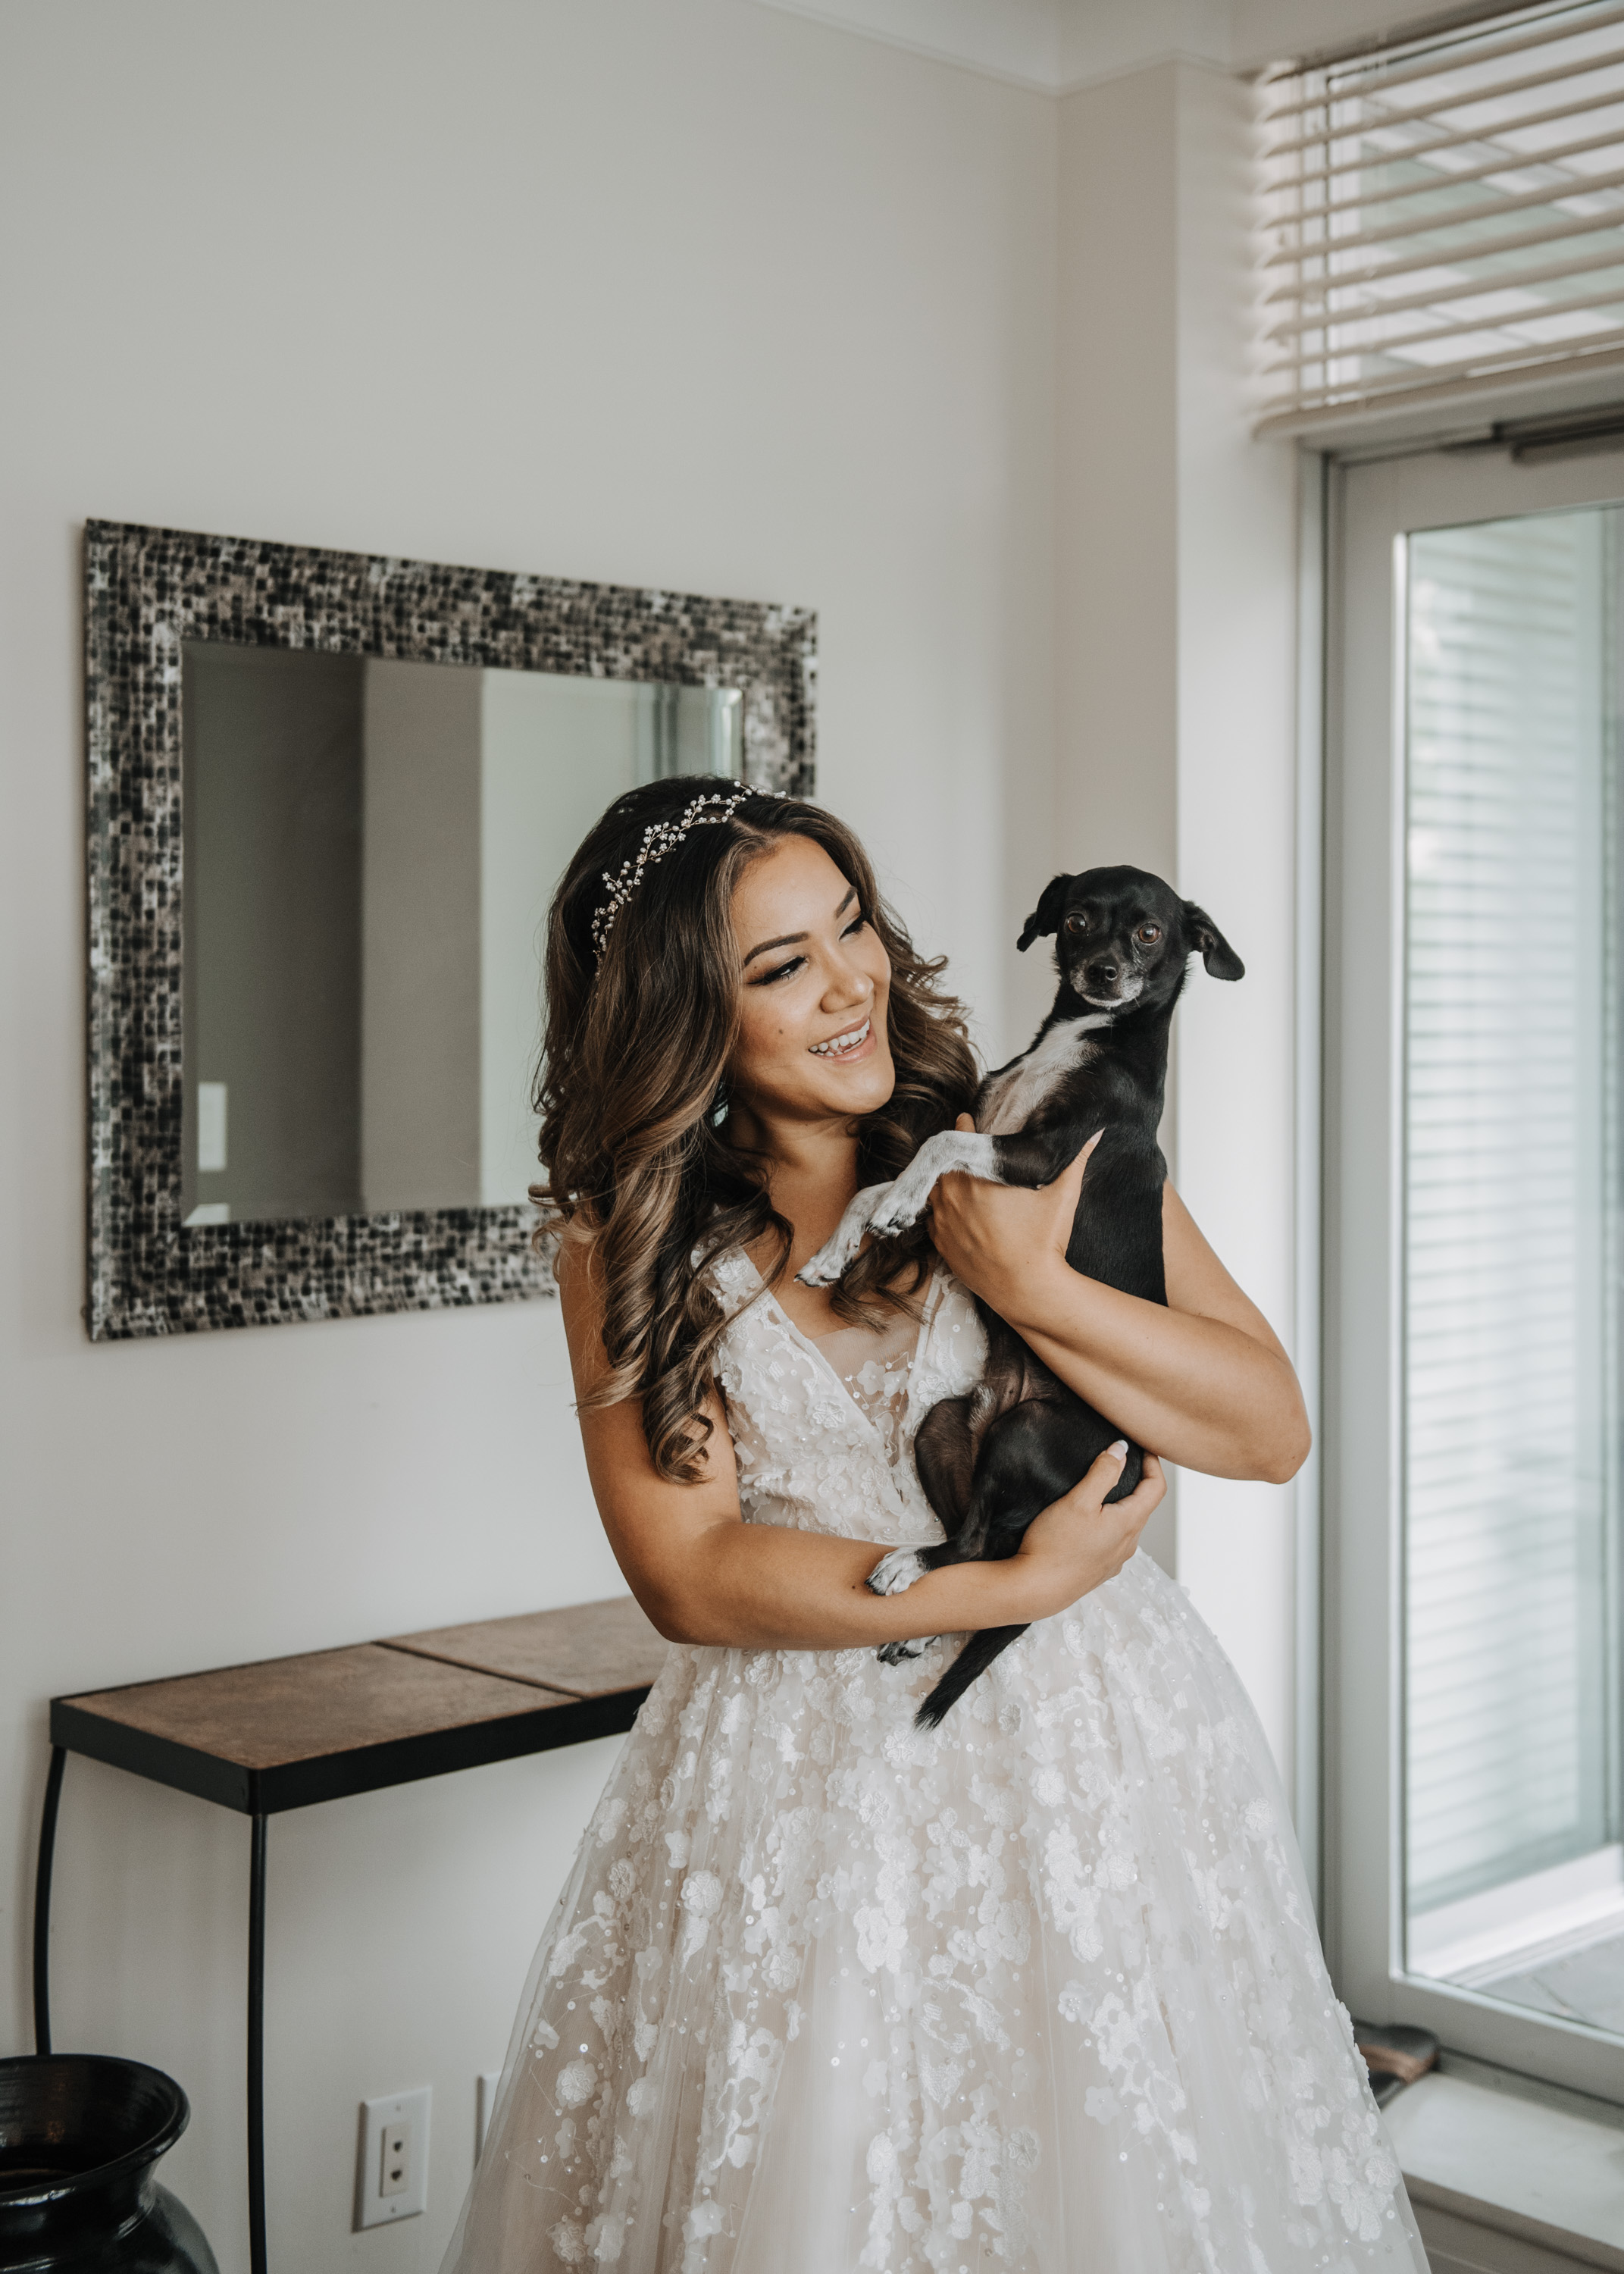 get creative with your wedding by including your pet